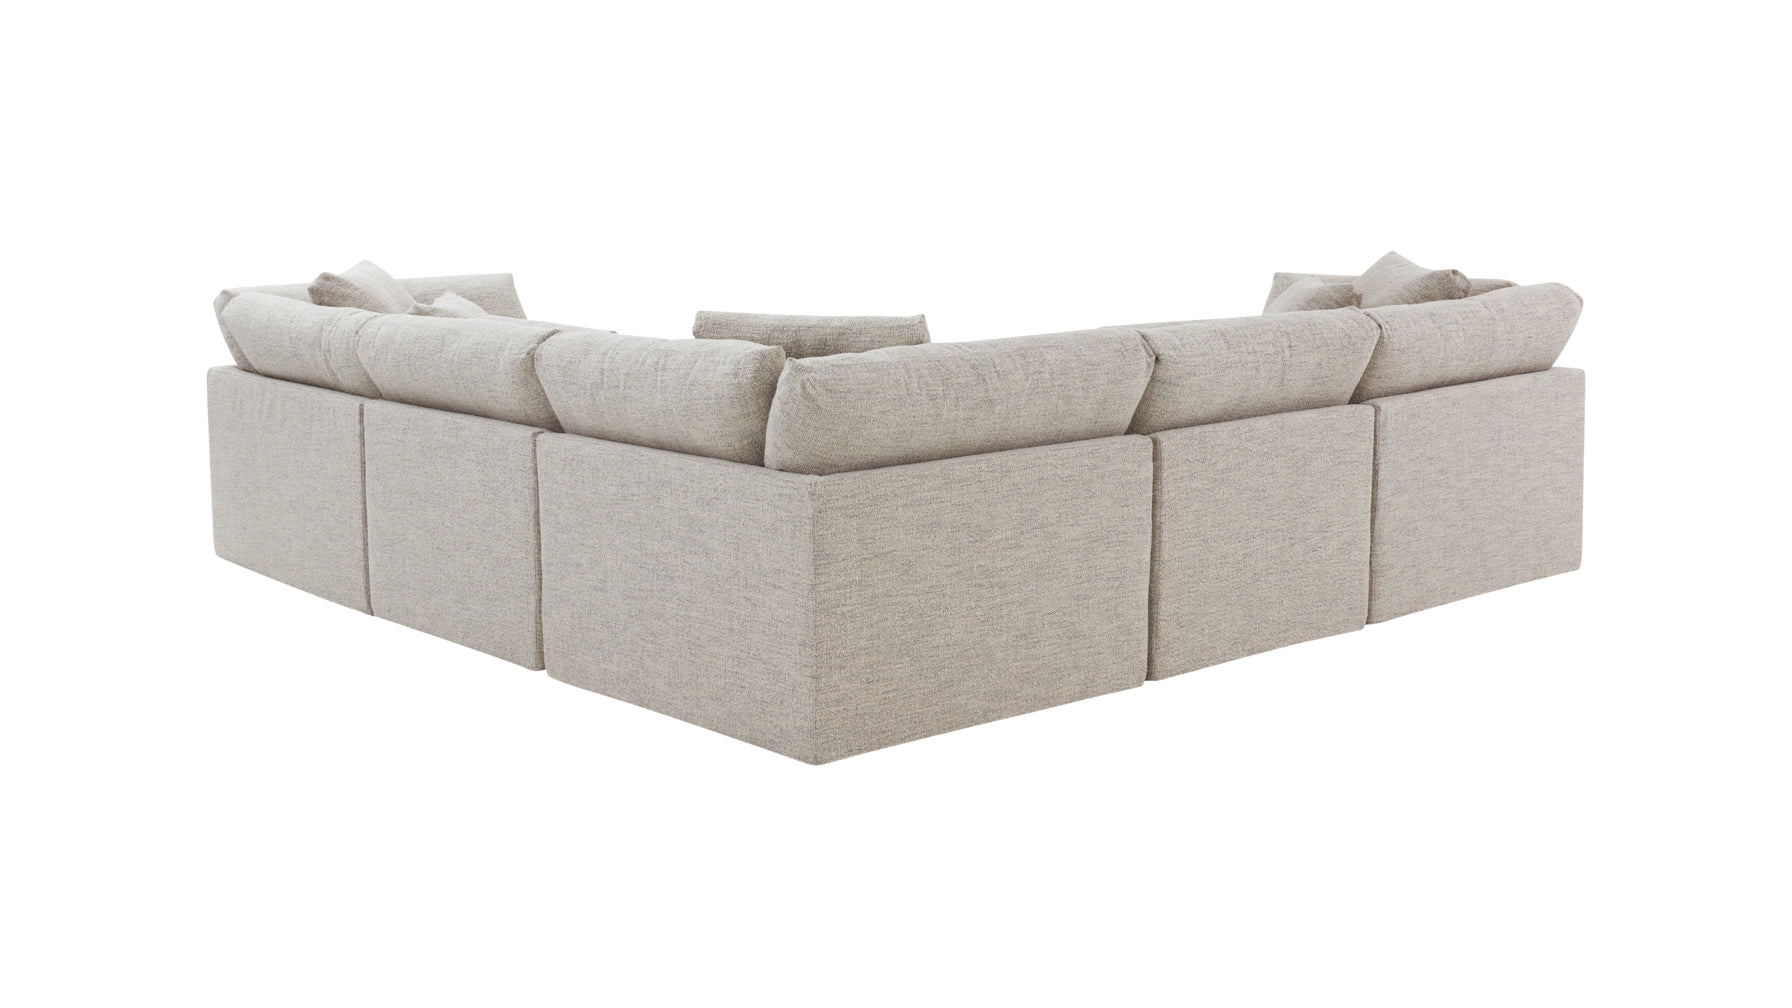 Get Together™ 5-Piece Modular Sectional Closed, Large, Oatmeal - Image 6